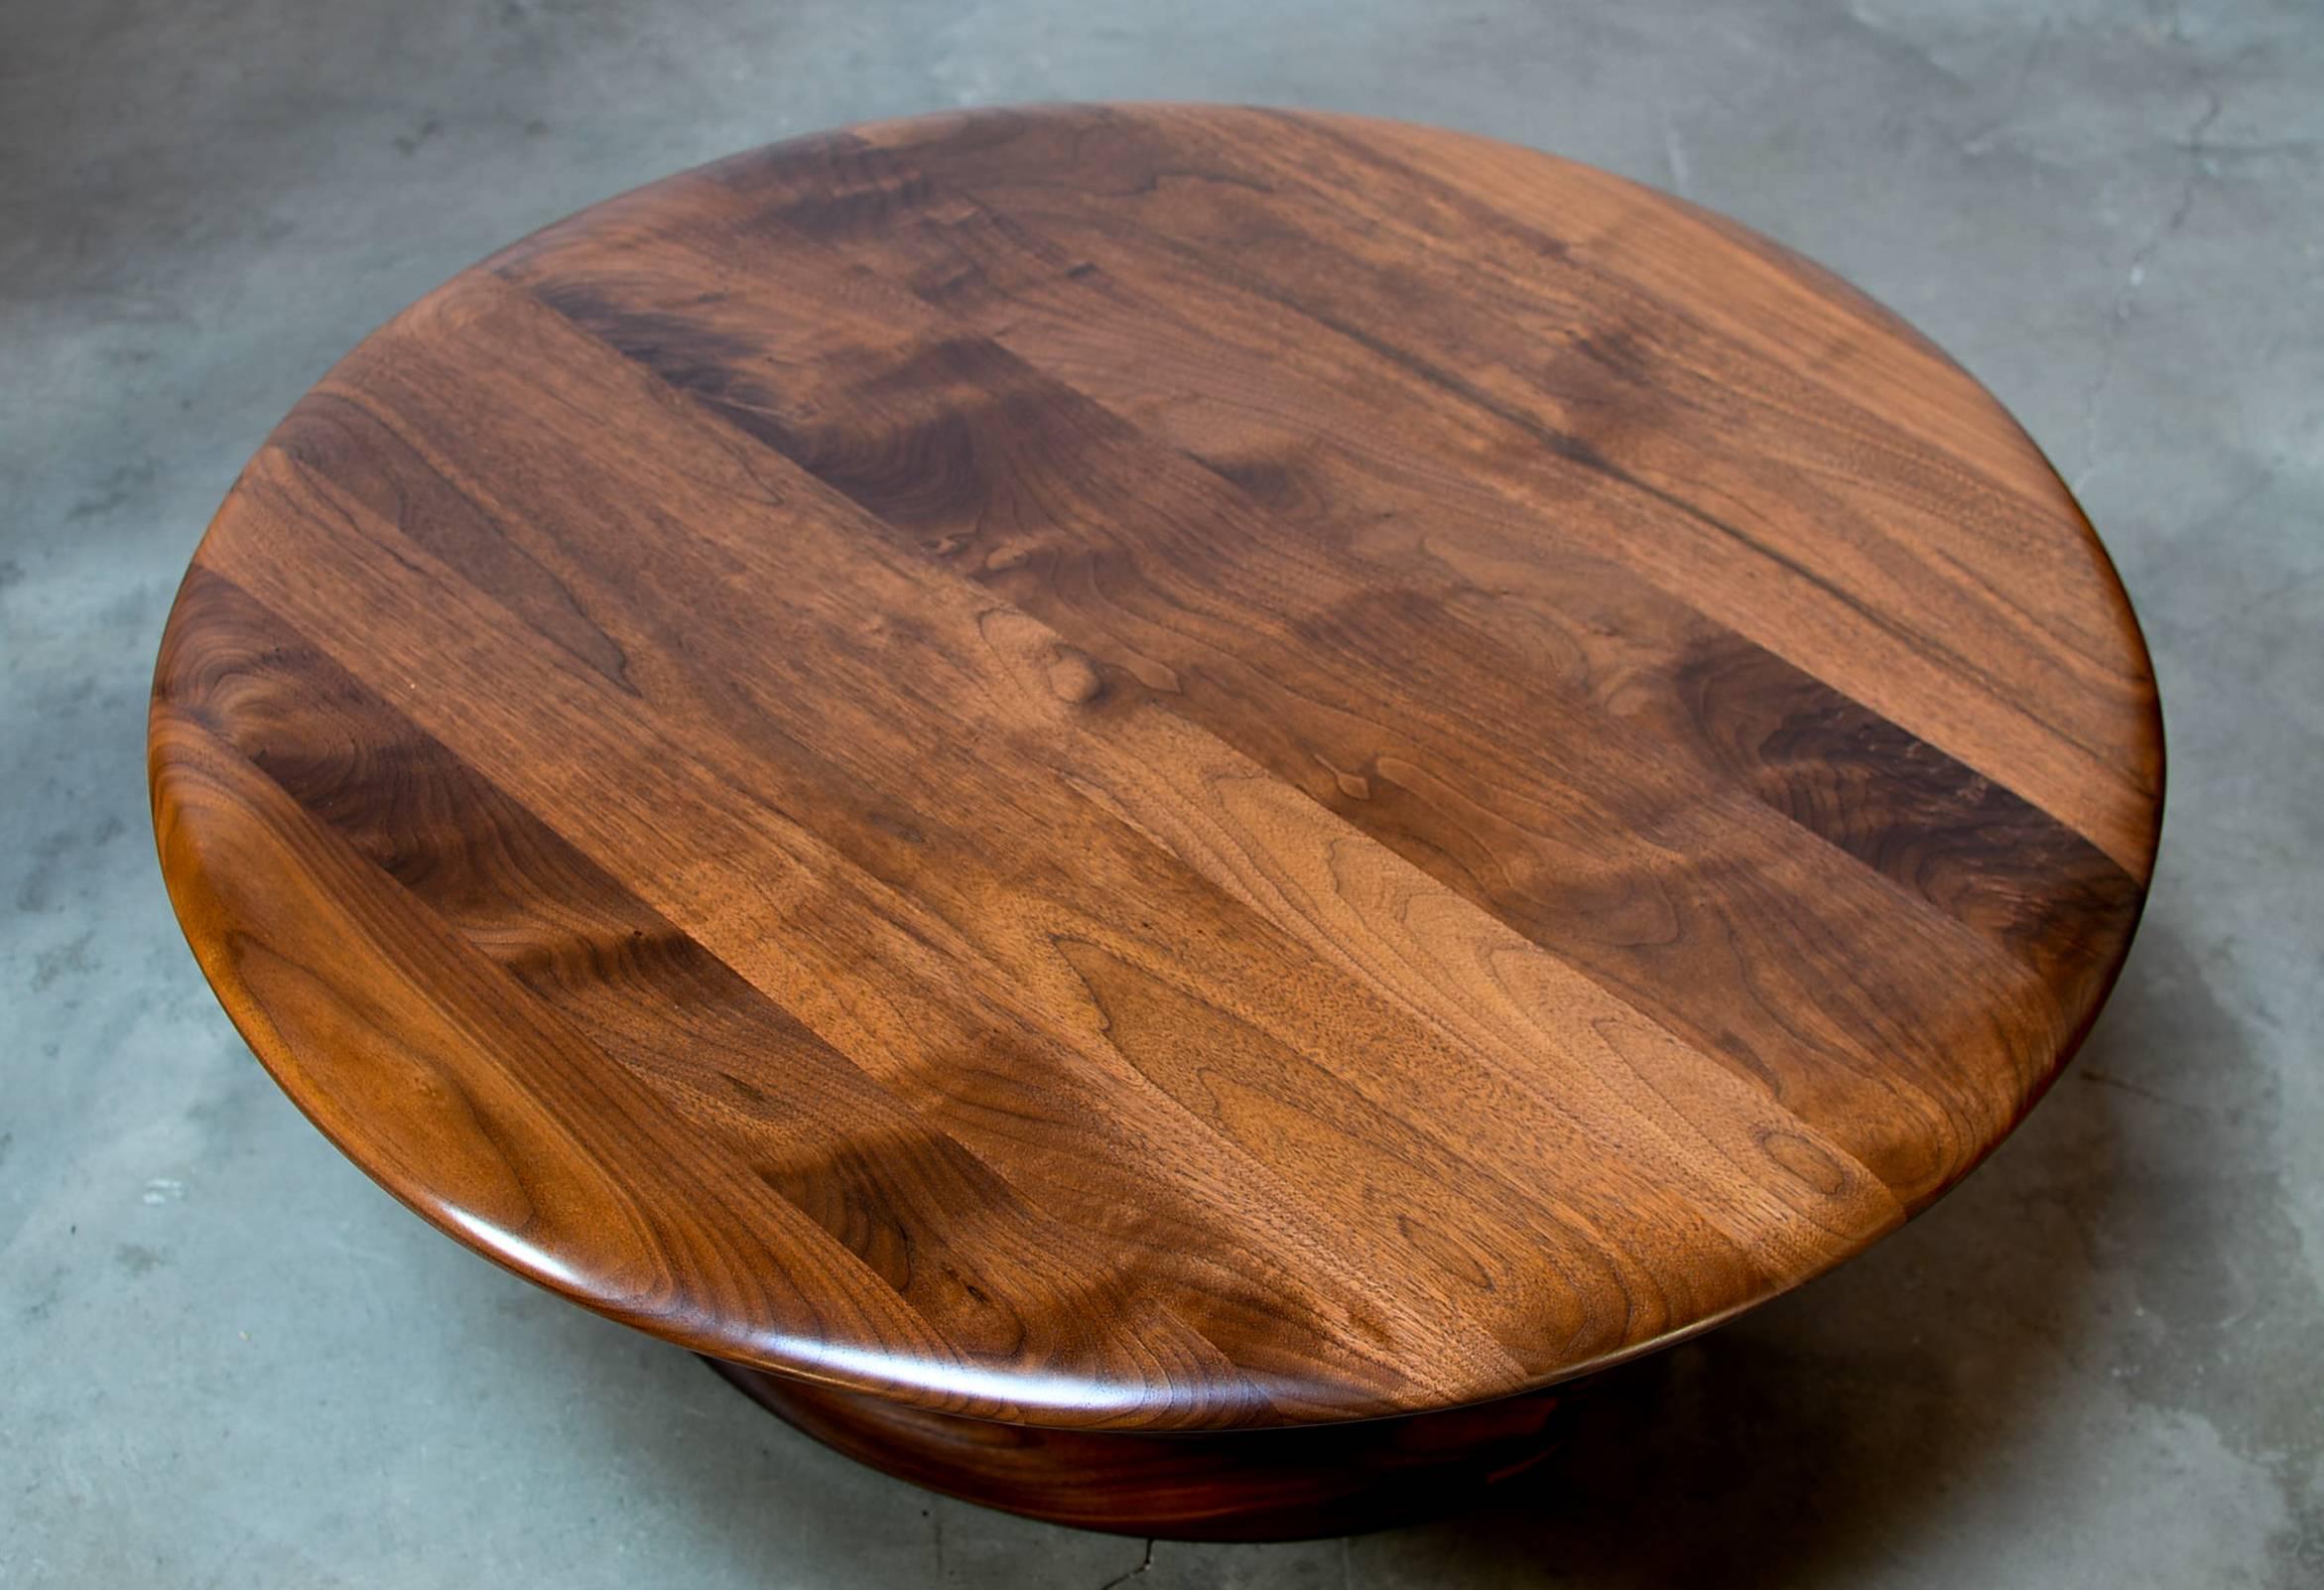 Epic black walnut sculpted base coffee table with brass and bubinga details designed by Master Craftsman, Dean Santner. This design was originally done in 1971 and only a handful were made. 

For over 46-years, Designer/Craftsman Dean Santner has